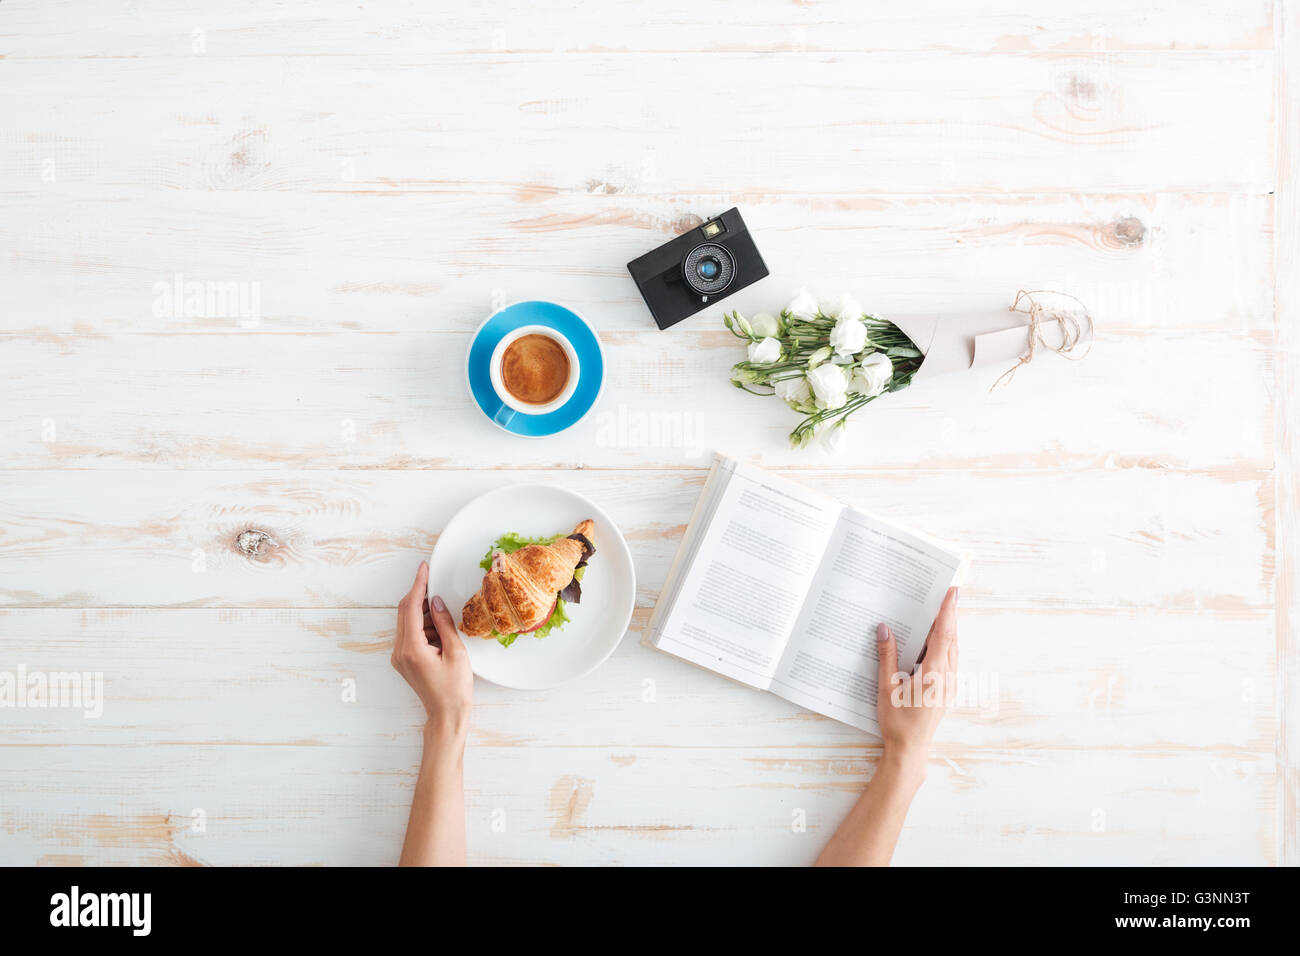 Hands of young woman eating croissant with coffee and reading book on wooden table with flower bouquet and photo camera Stock Photo